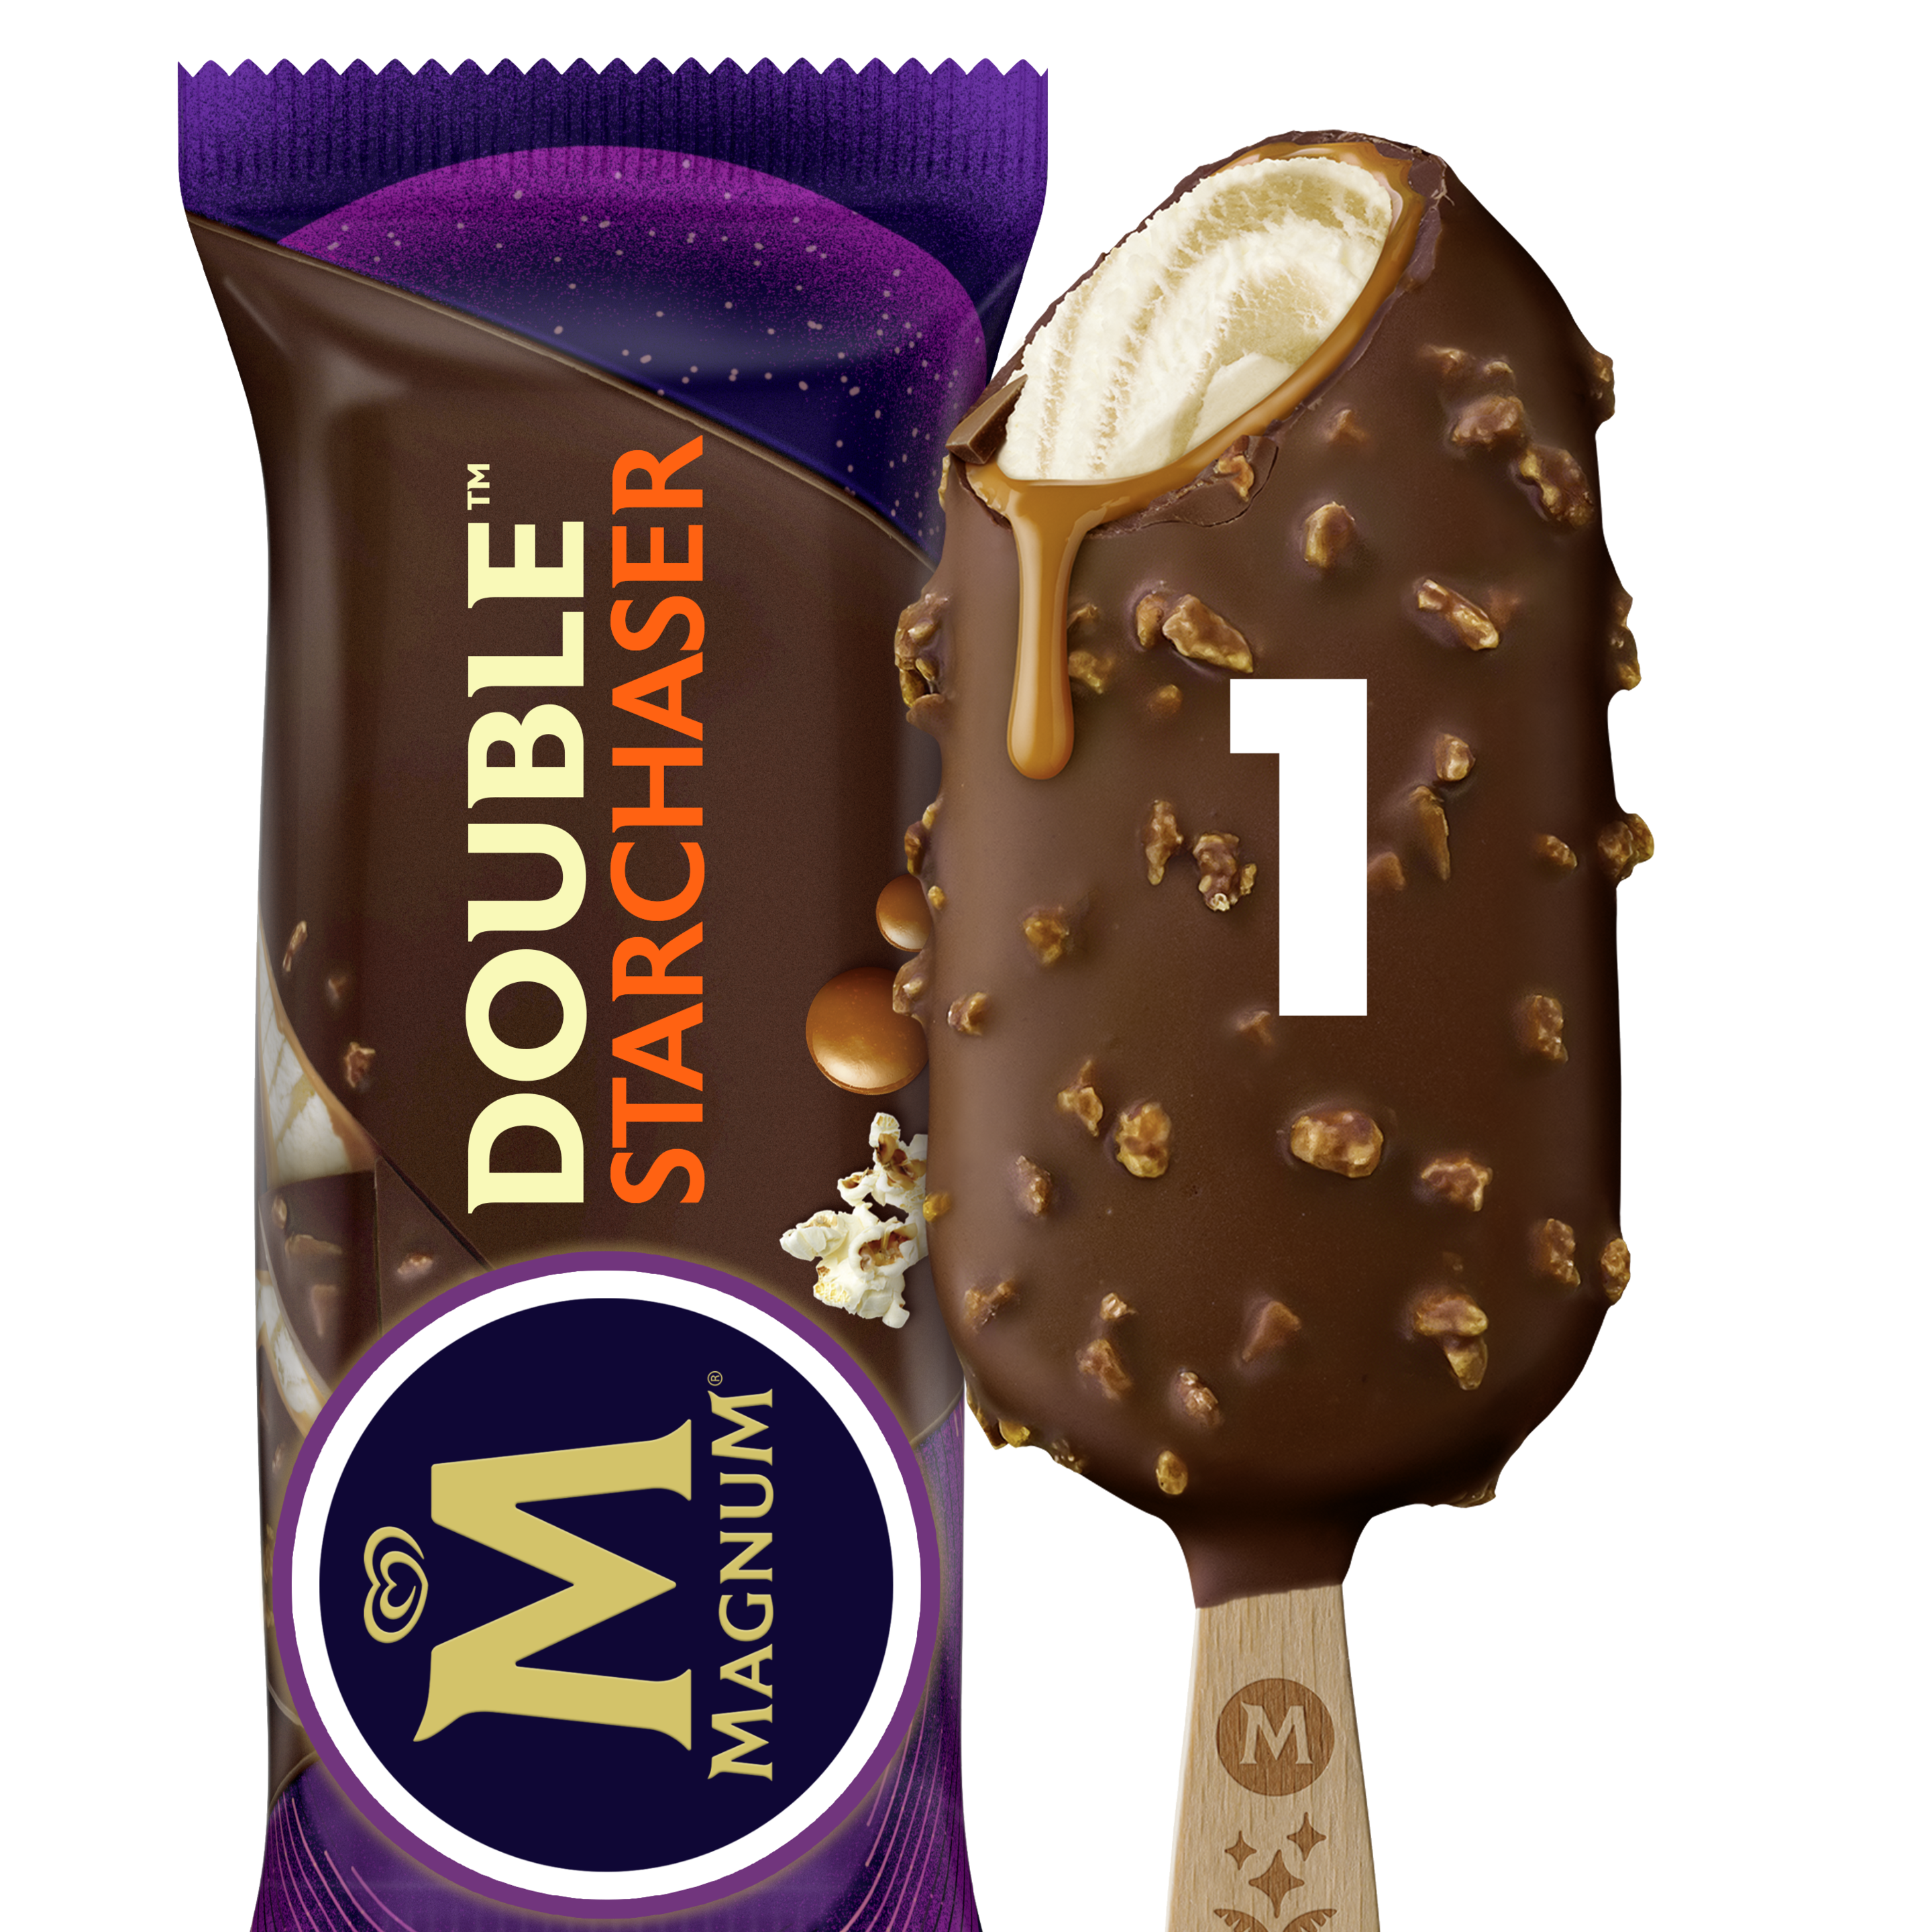 Magnum Double Starchaser